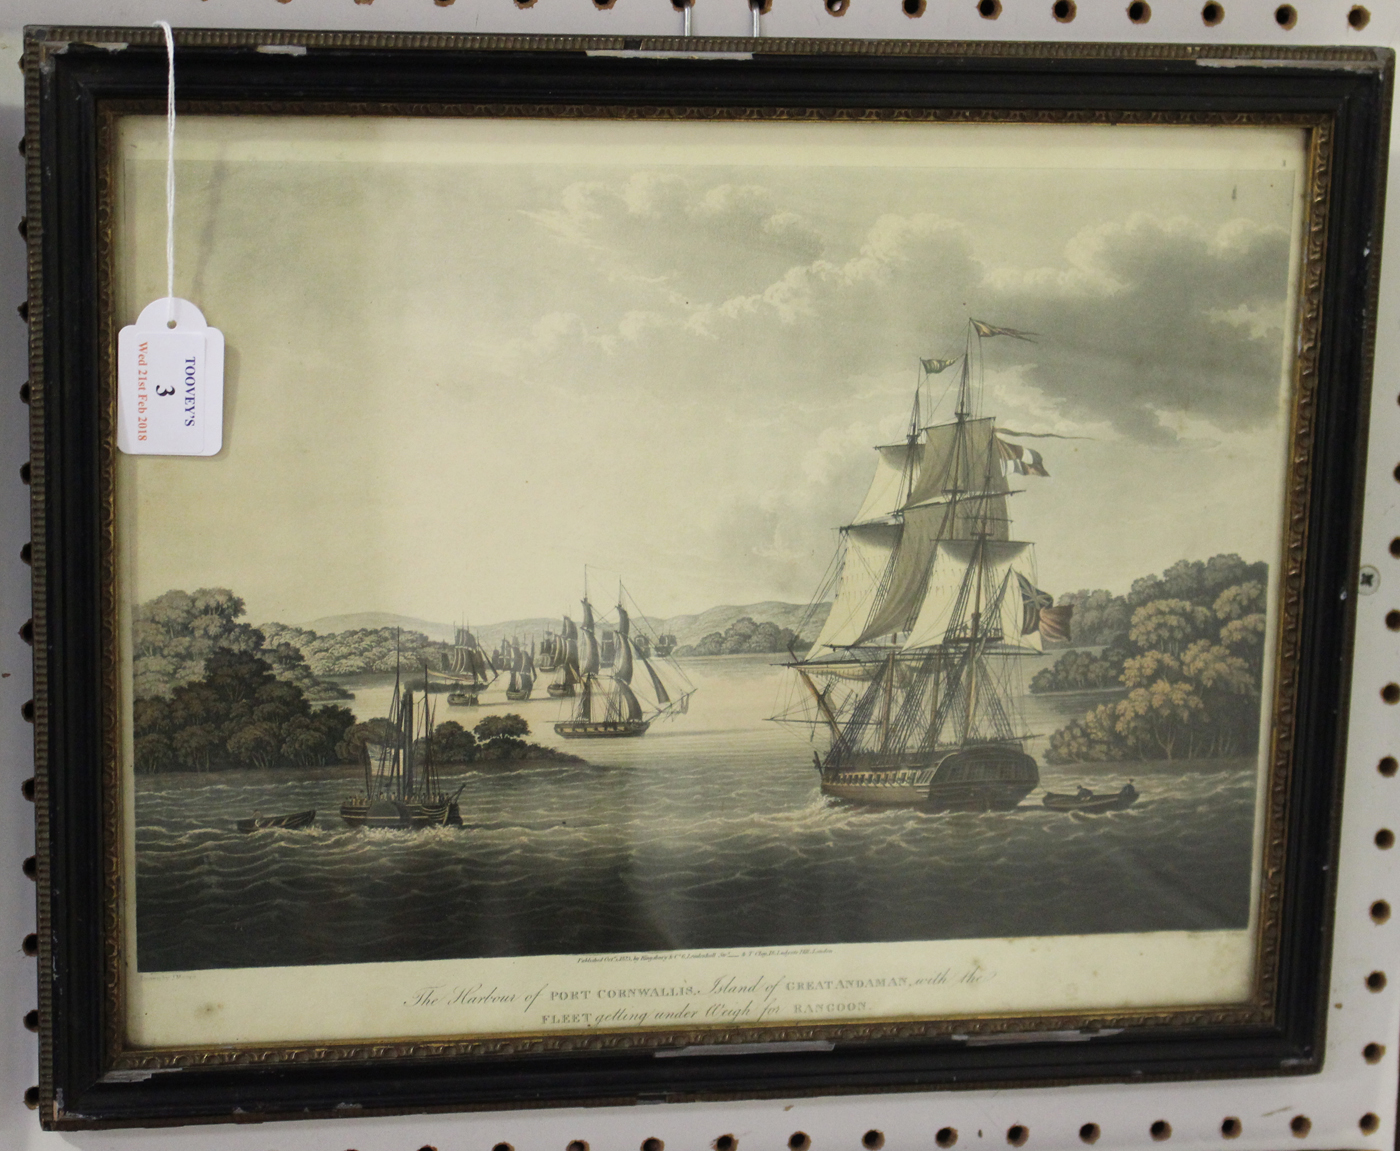 Hunt and Reave, after Joseph Moore - 'The Harbour of Port Cornwallis, Island of Great Andaman,